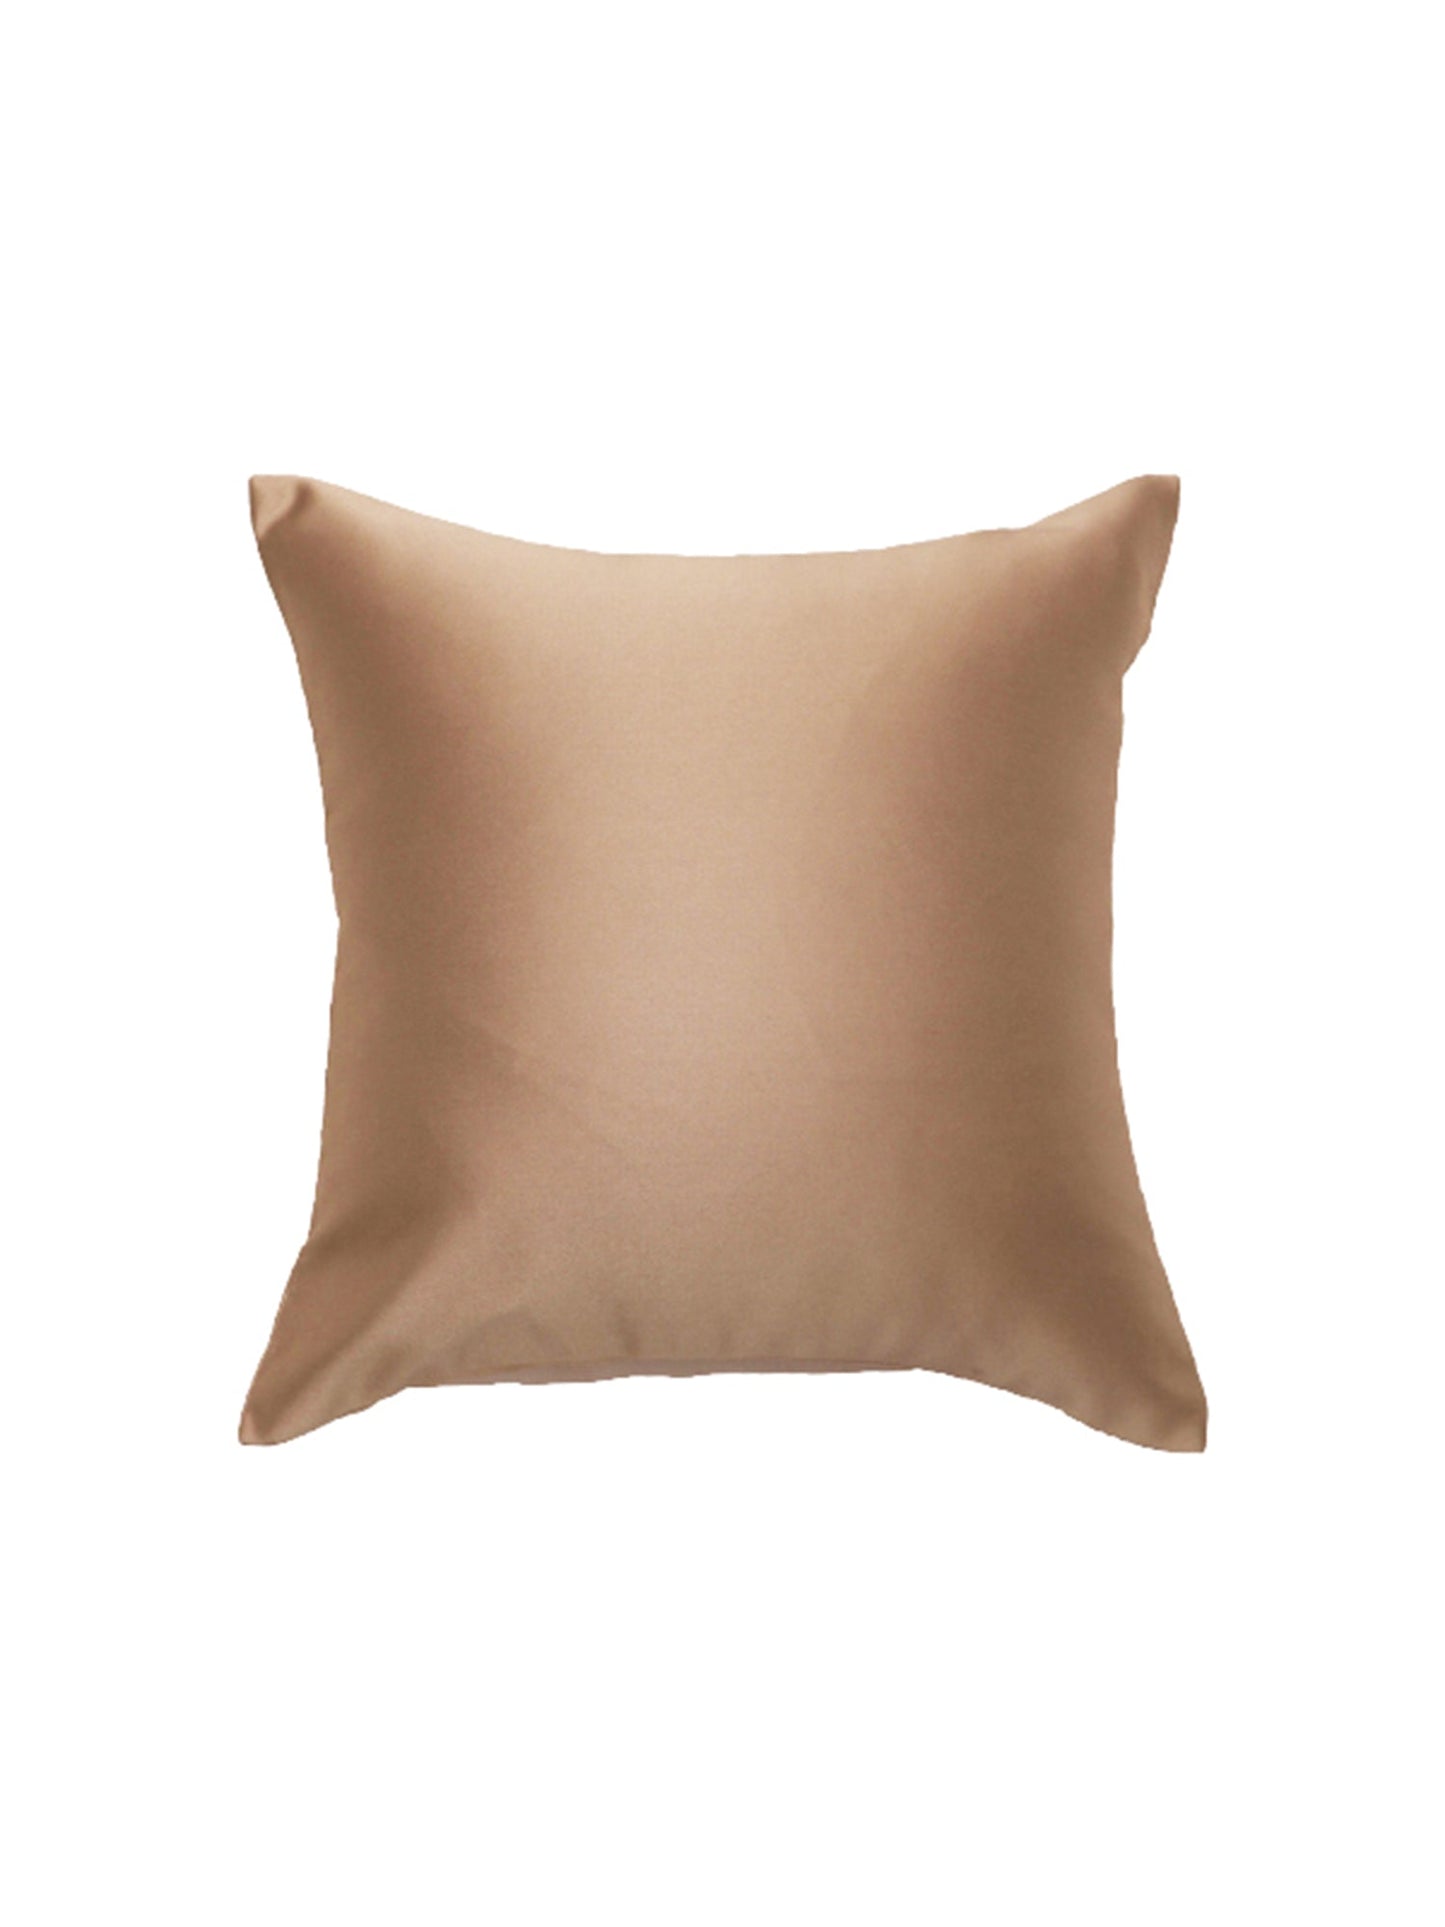 Embroidered Cushion Cover 100% Polyester  Gold Solid Plain  - 12" X 12"